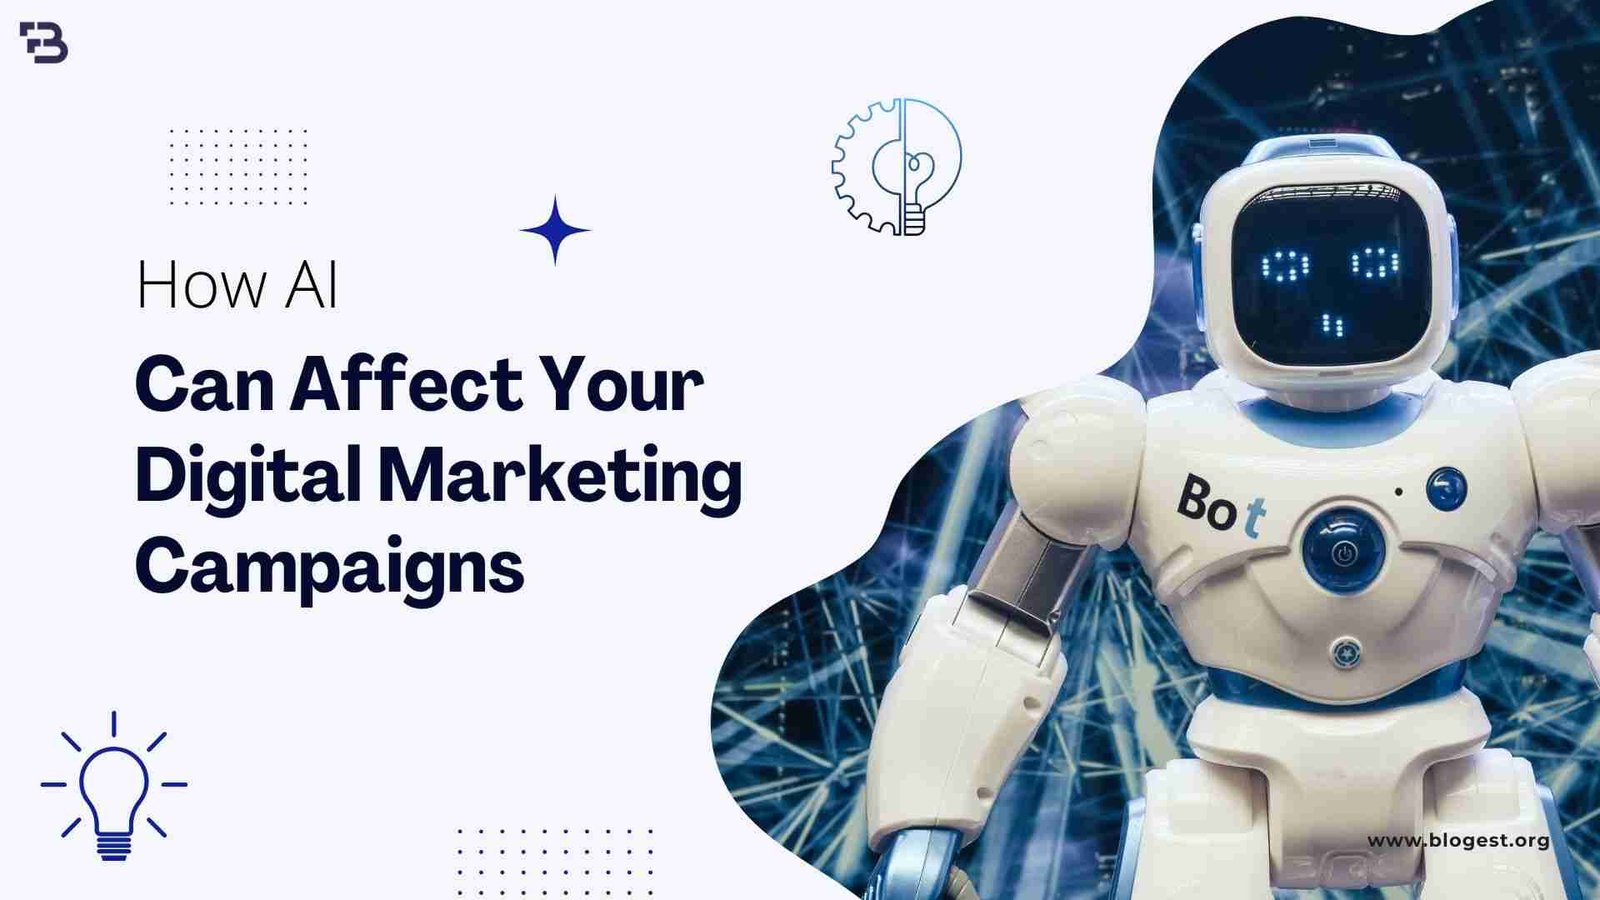 How AI Can Affect Your Digital Marketing Campaigns In 2022